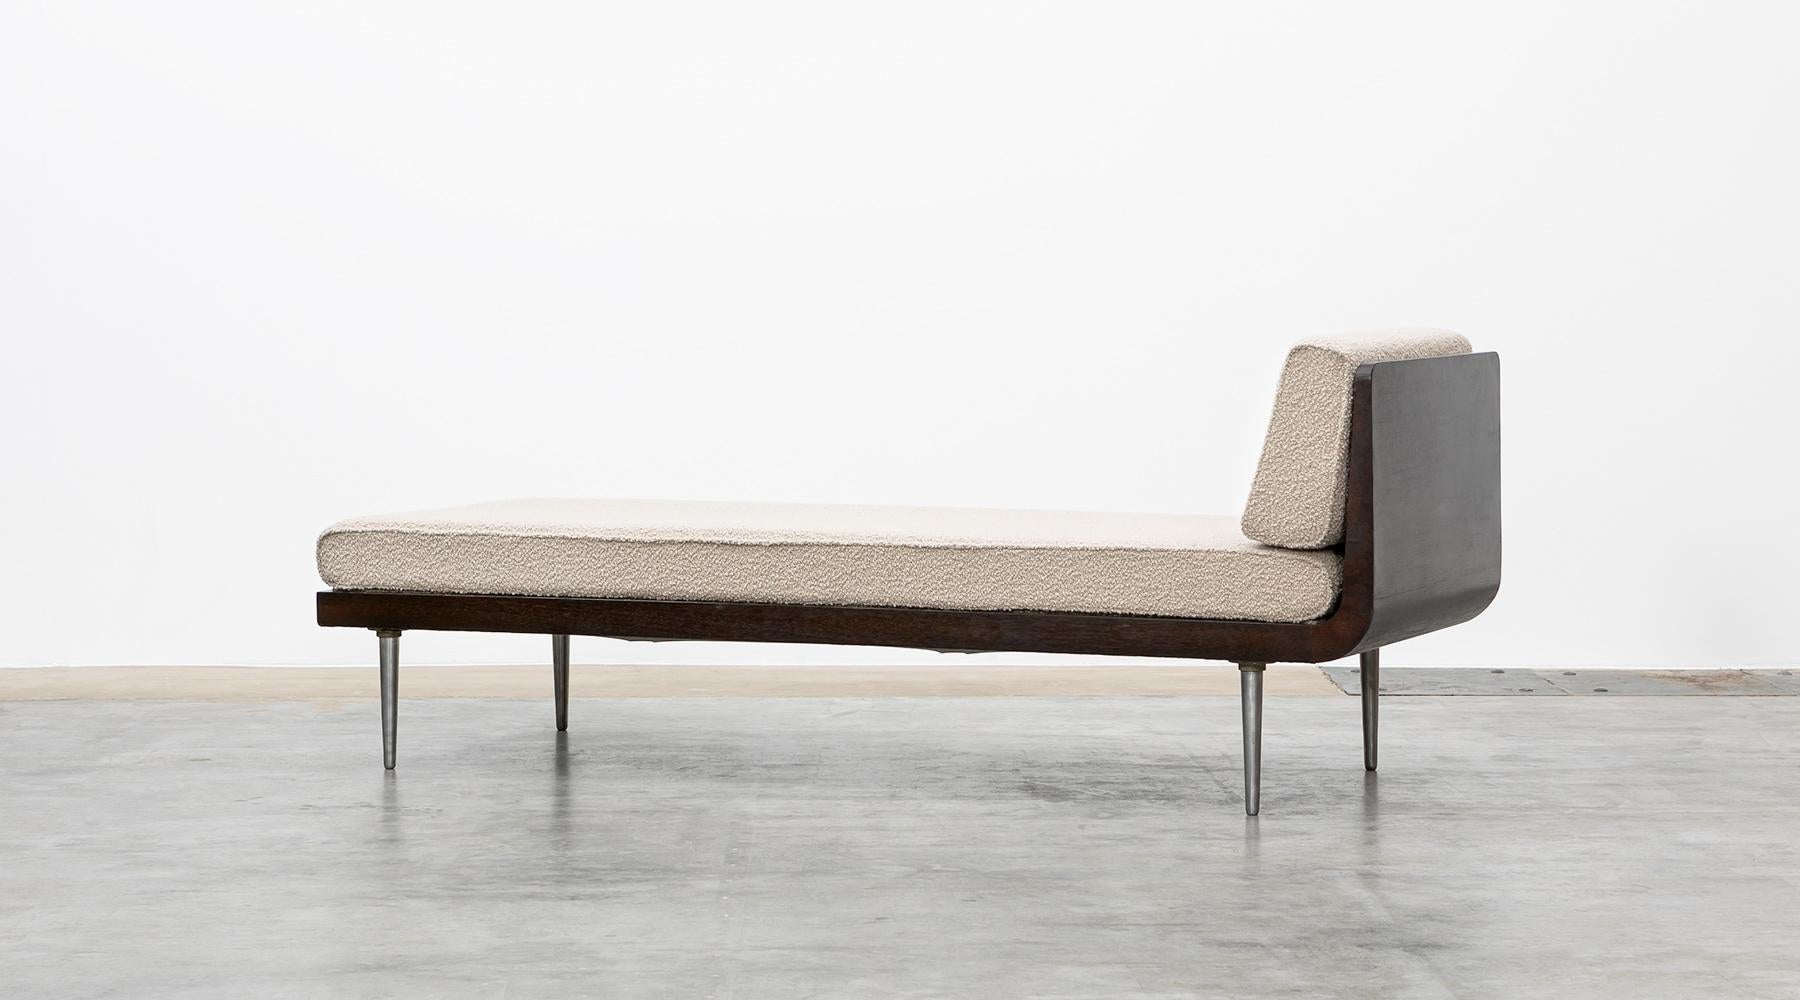 Daybed, new upholstery, wooden base, metal legs, Edward Wormley, USA, 1952.

Impressively simple daybed designed by famous Edward Wormley. The base is a wooden construction and stands on metal legs. The lying surface and back cushions are